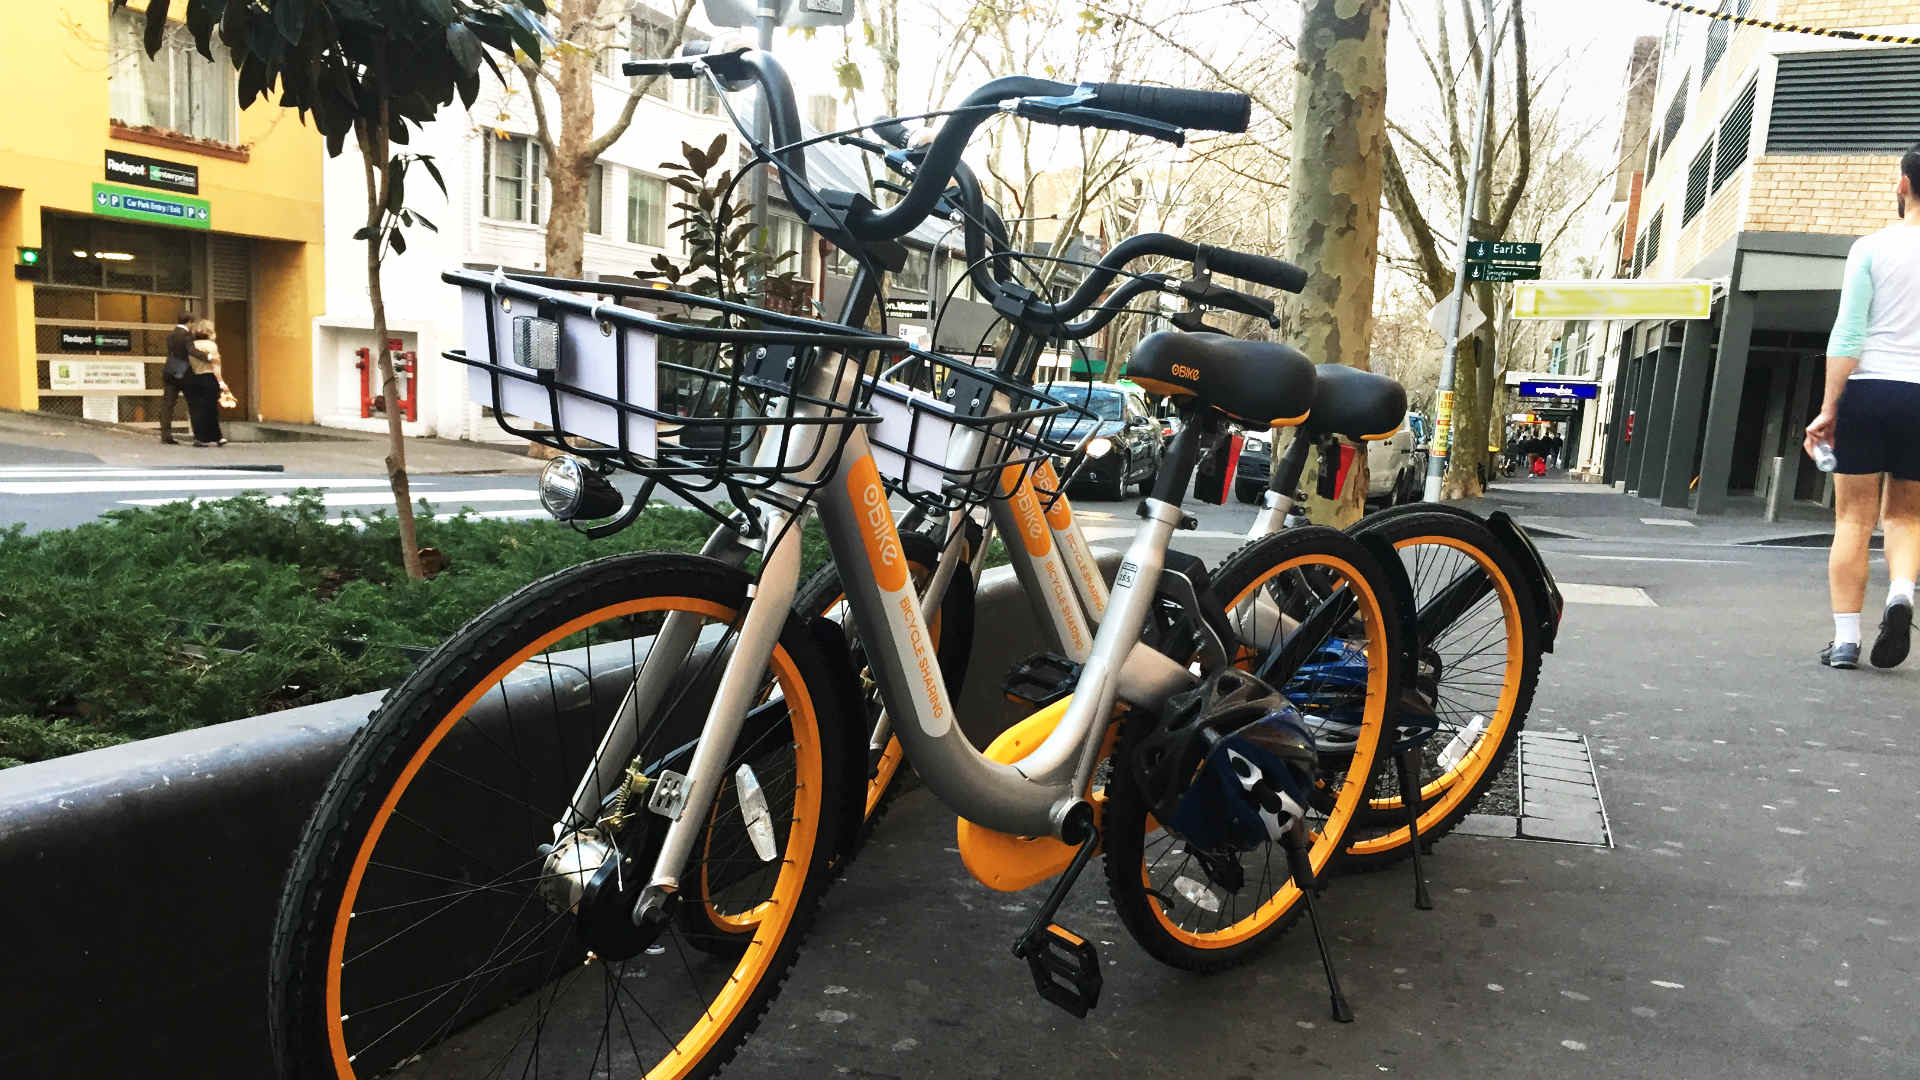 Three Melbourne Councils Are Cracking Down on Rogue Dockless Bikes